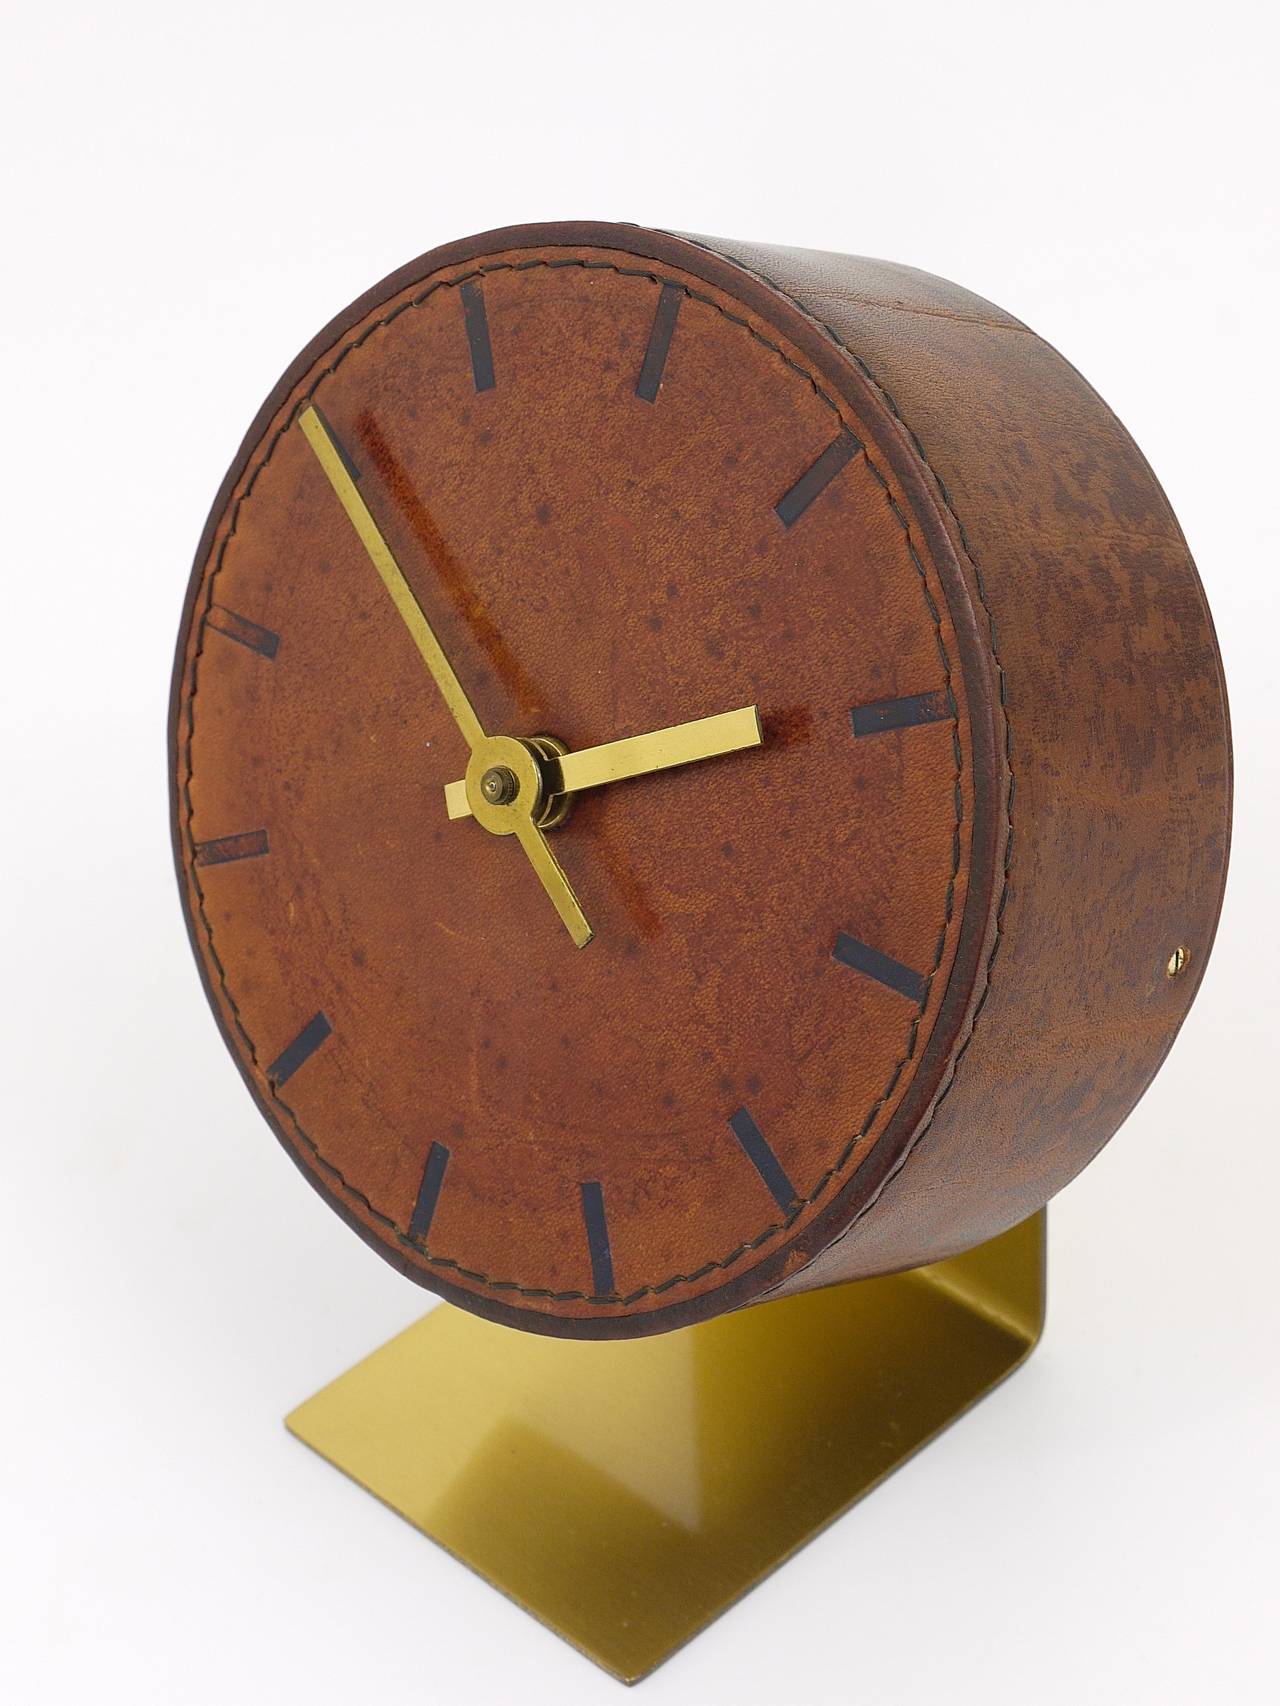 A beautiful leather and brass clock, designed and executed by Carl Aubock, Vienna, 1950s. An amazing straight-lined clock, has a leather wrapped clocks face and embossed marks for each hour. Battery-operated movement. Very good condition, charming